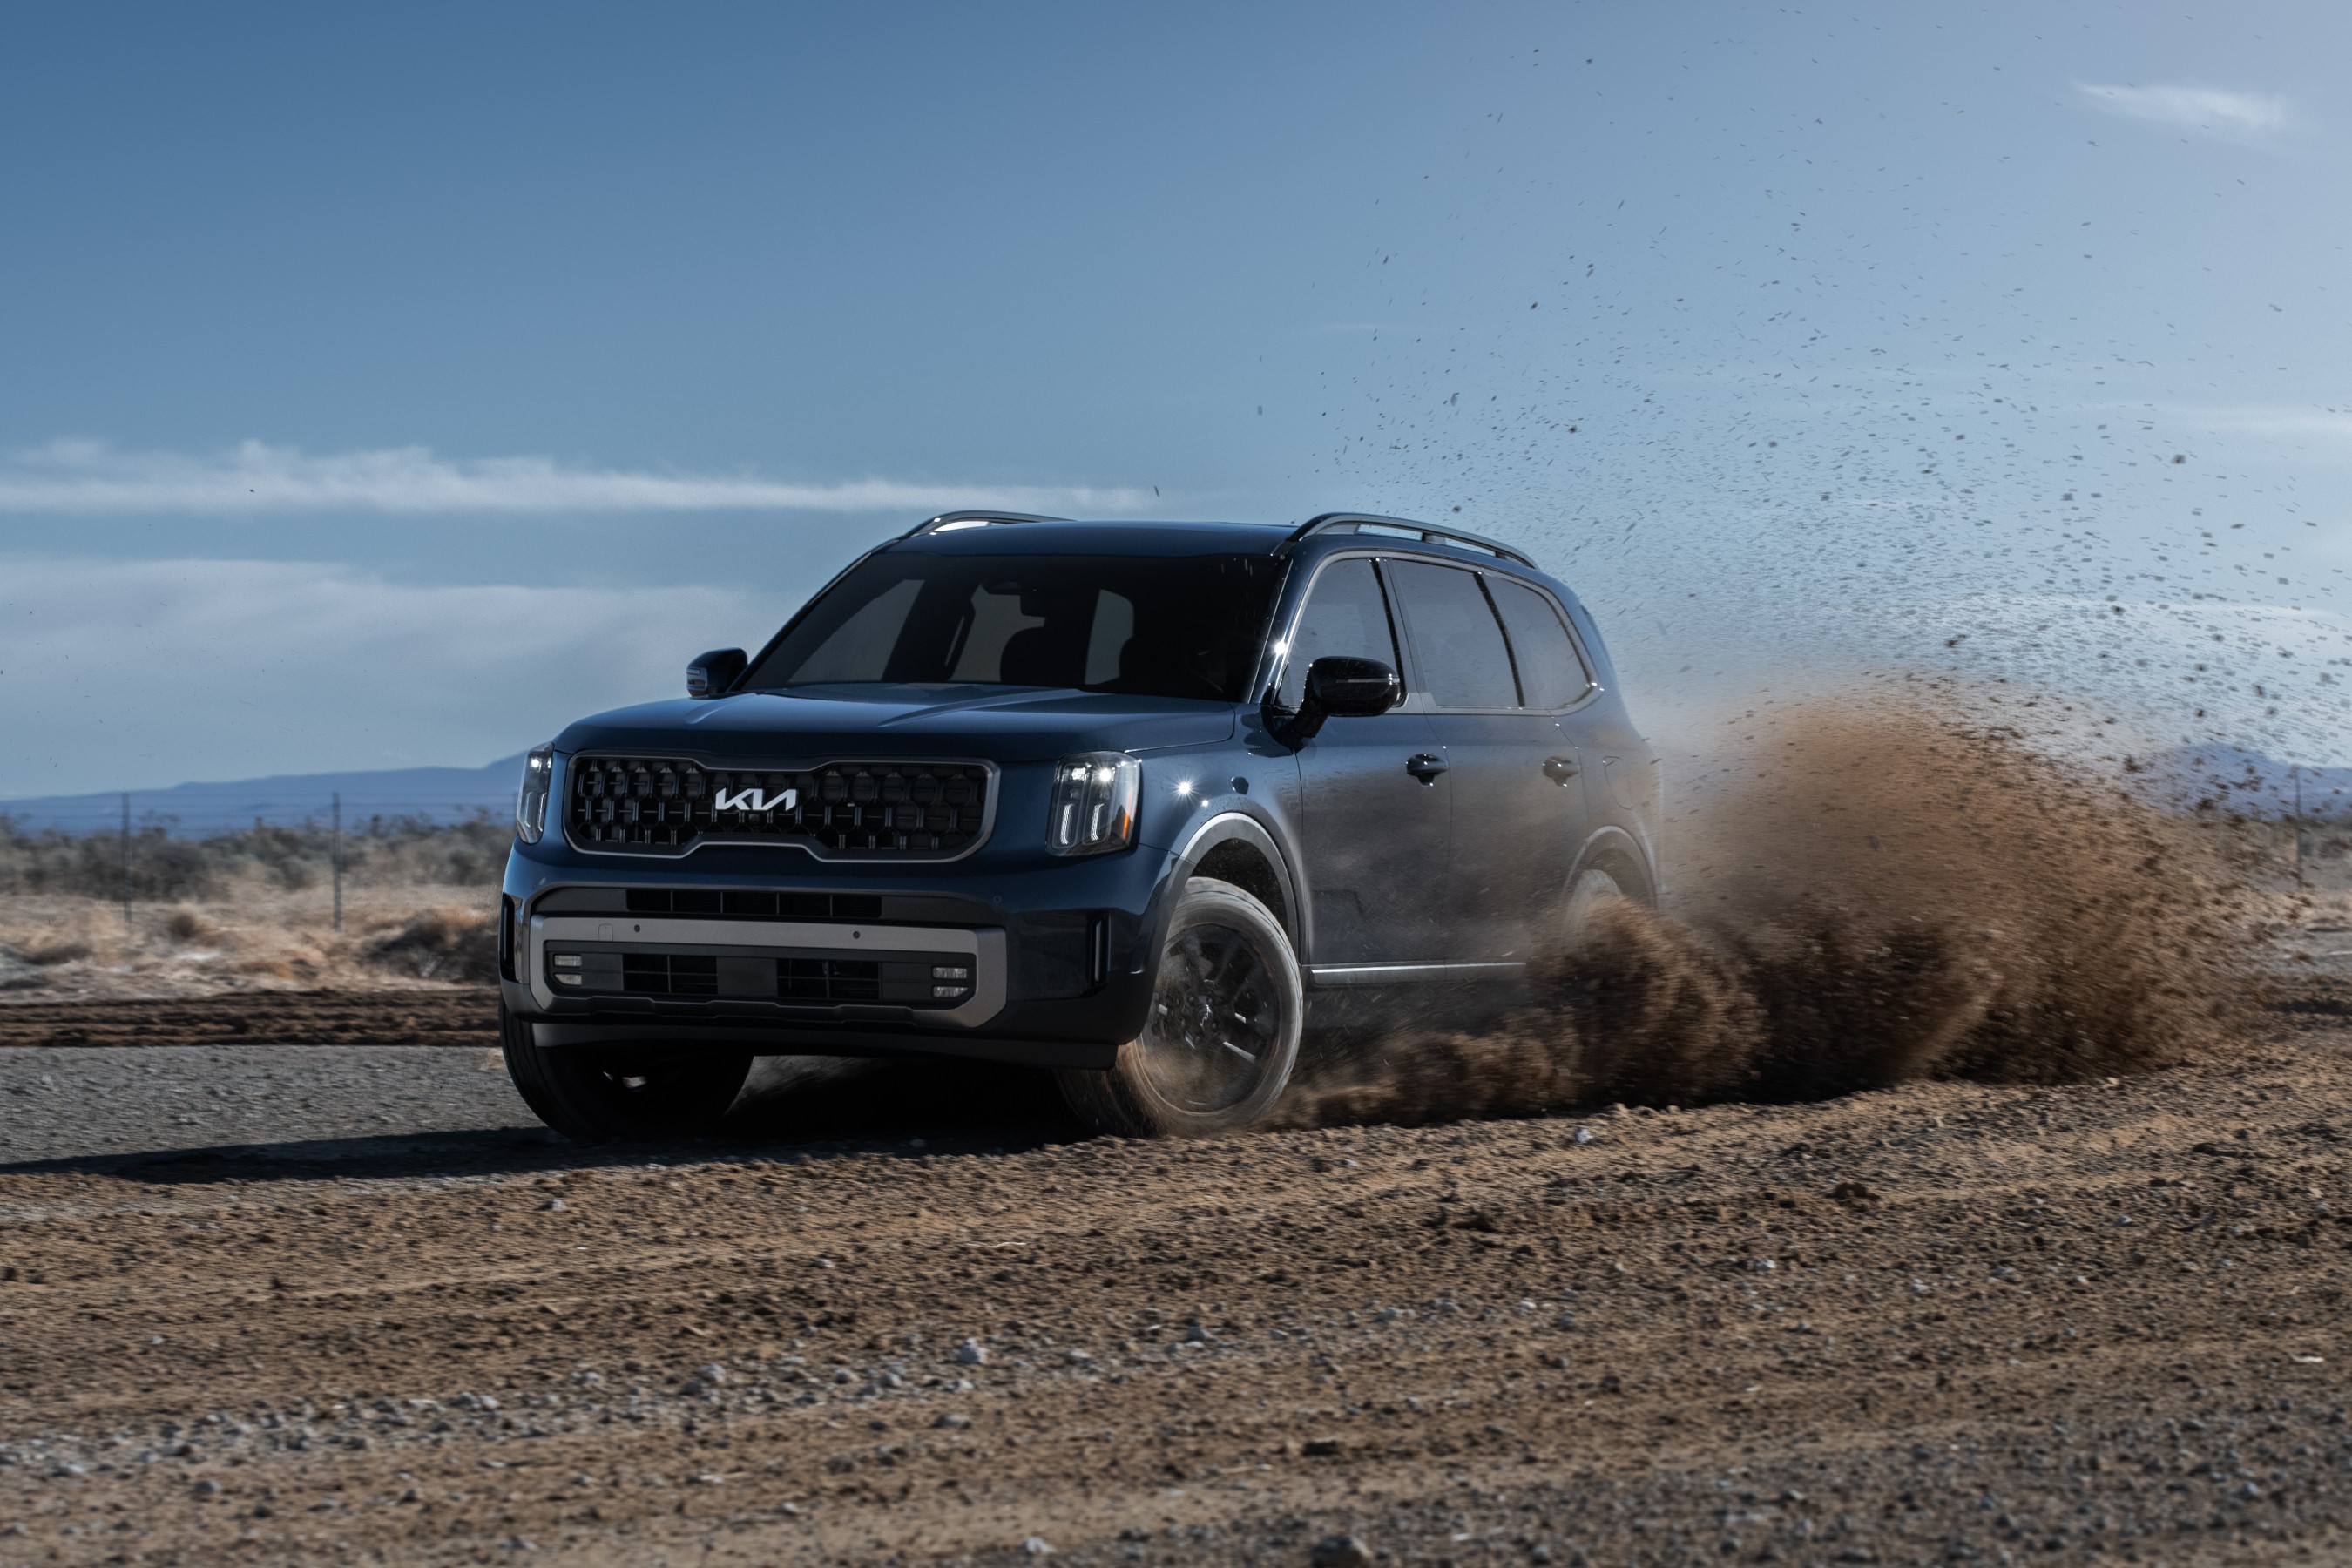 The new 2023 Kia Telluride is designed specifically for the U.S. and will be assembled at Kia’s award-winning Georgia manufacturing facility alongside the K5, Sportage, and Sorento.